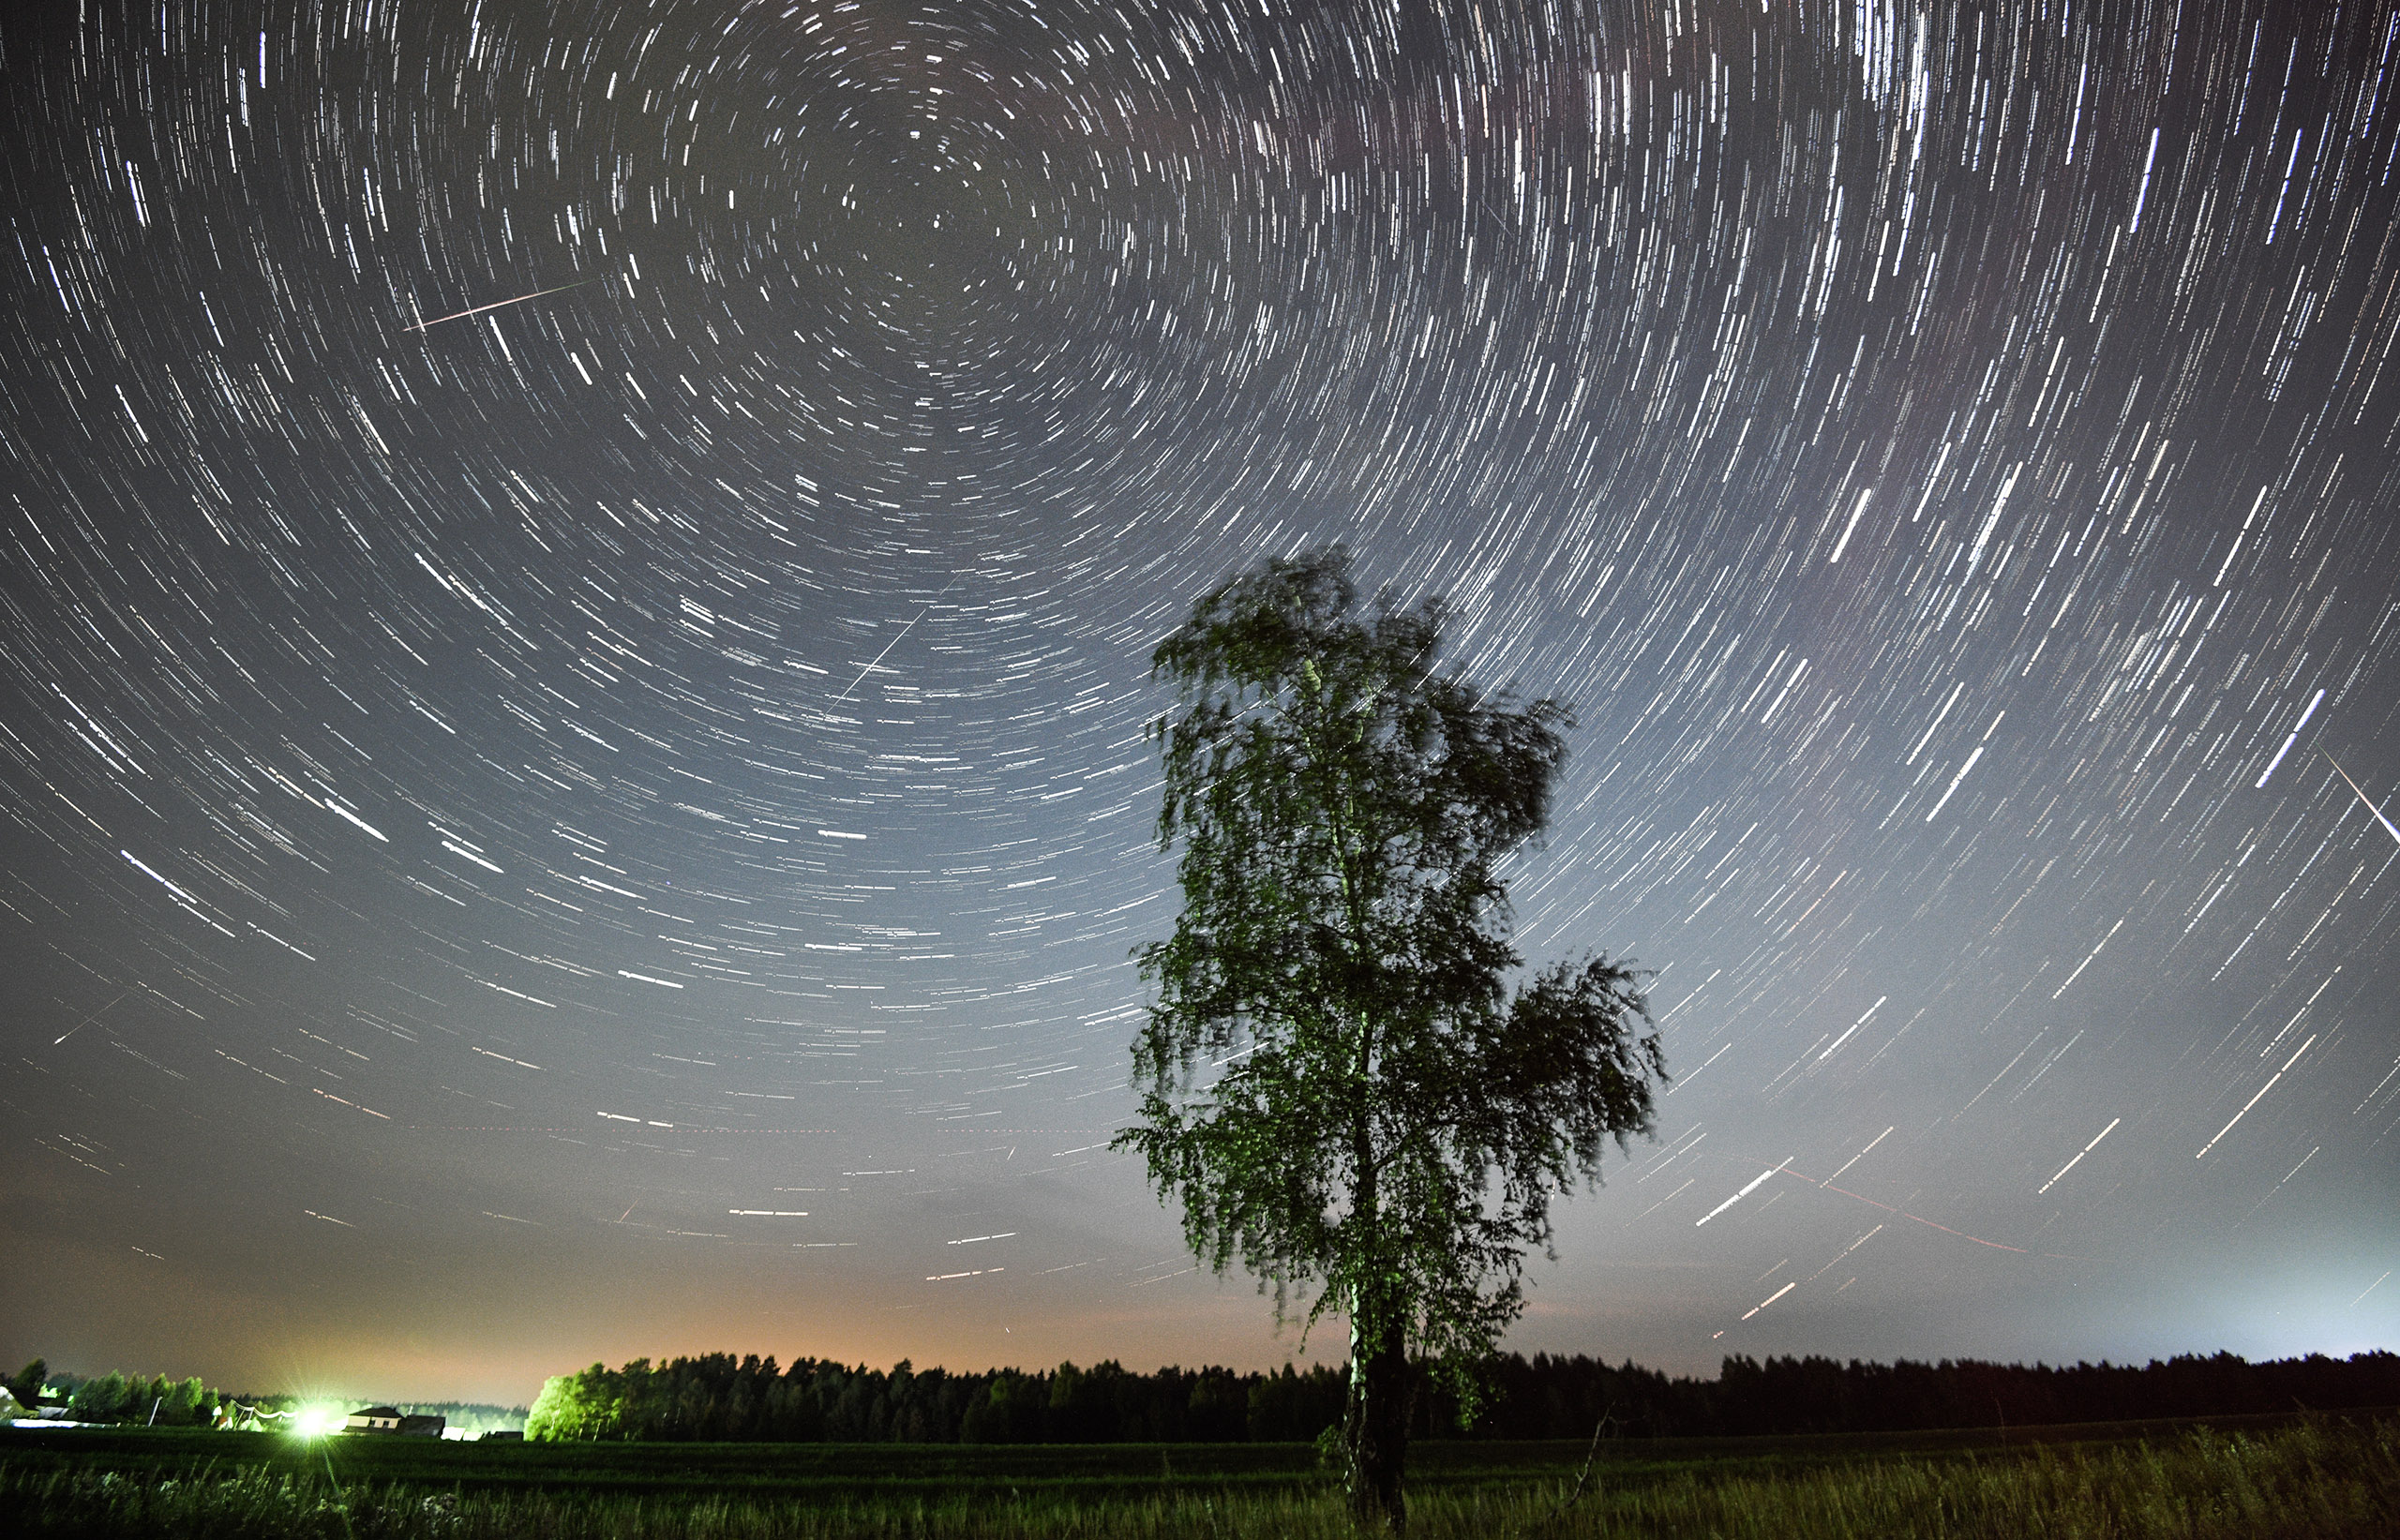 The Perseids meteor shower, Russia, Aug. 12, 2016.